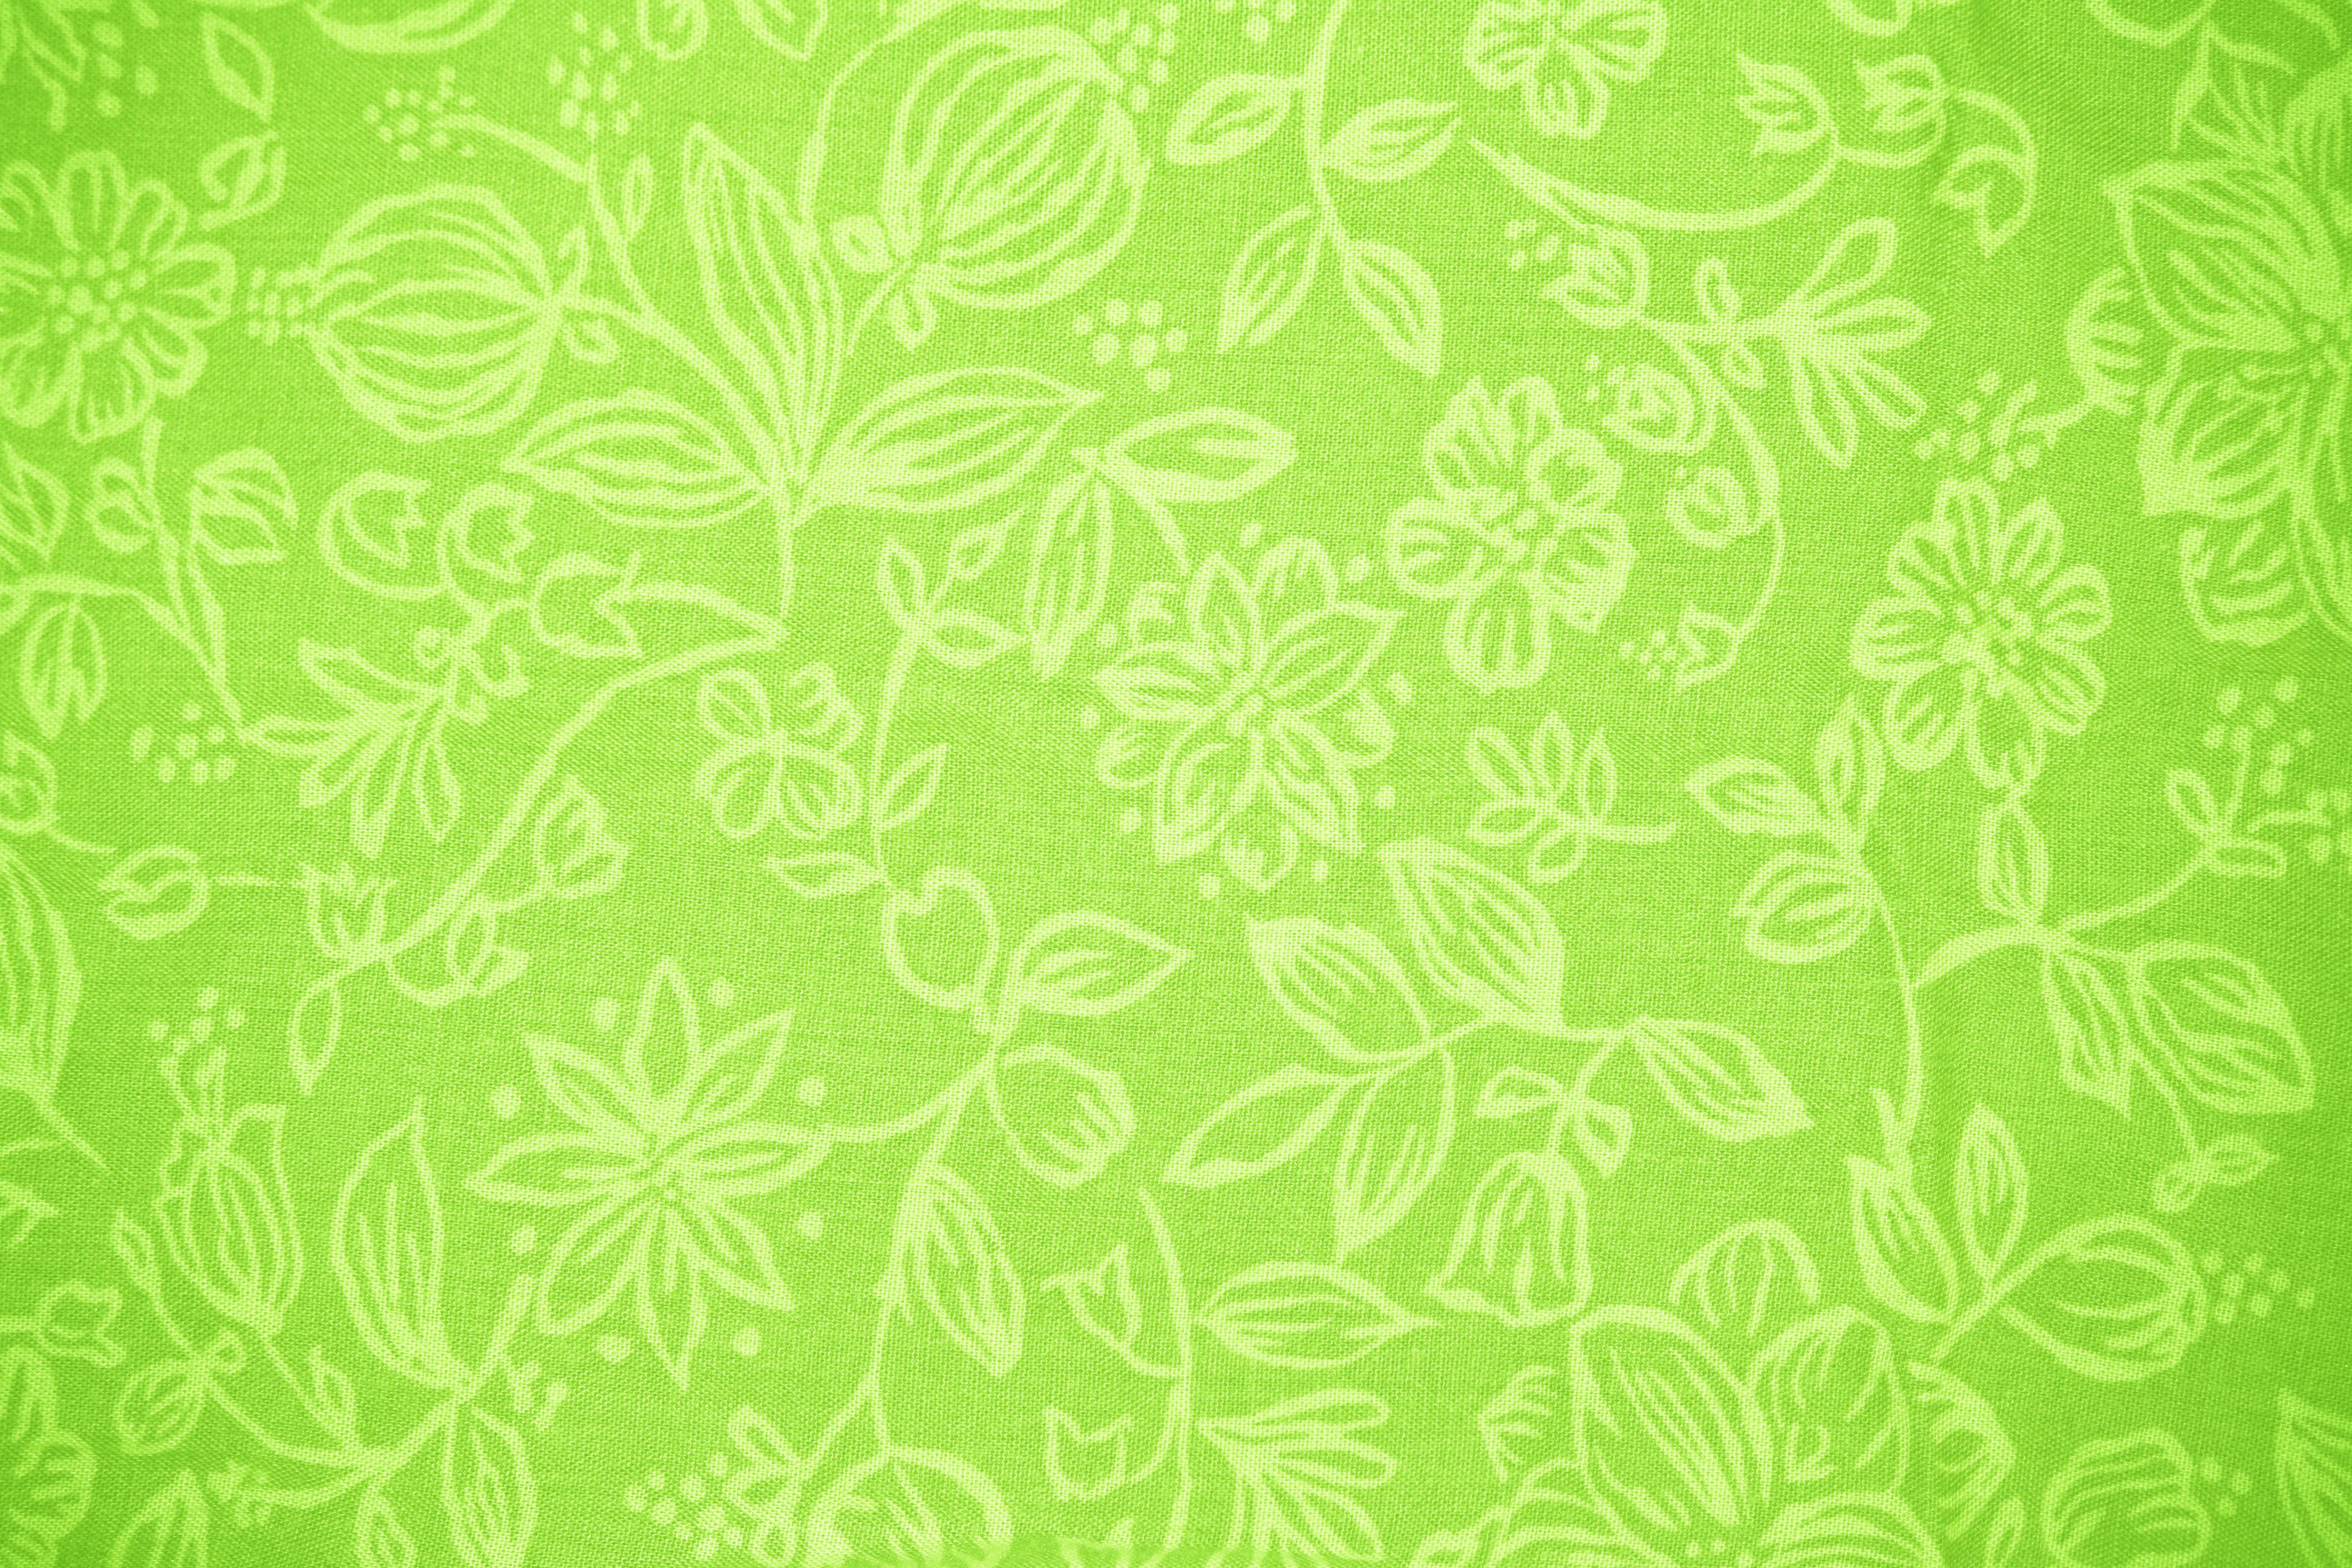 Lime Green Fabric with Floral Pattern Texture   Free High Resolution